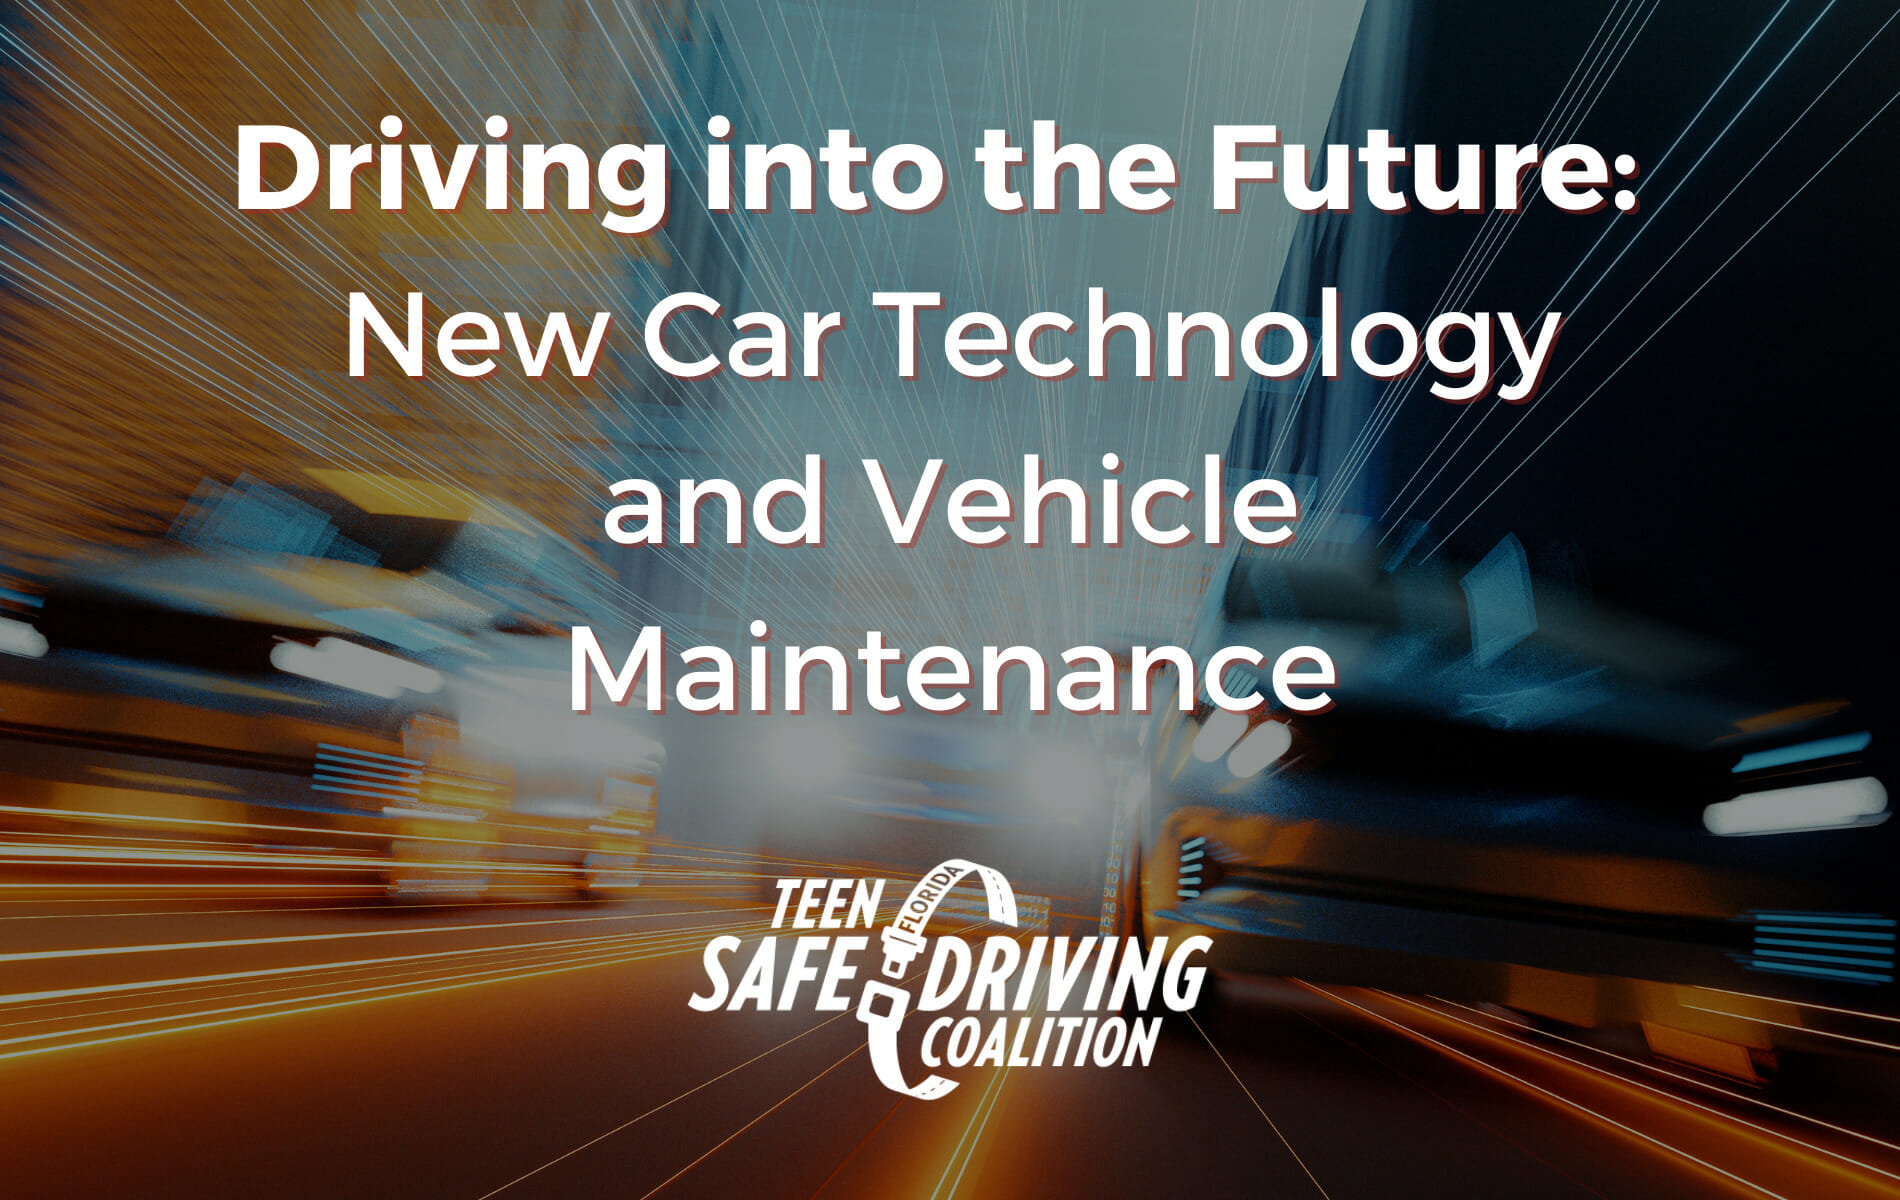 Driving into the Future: New Car Technology and Vehicle Maintenance